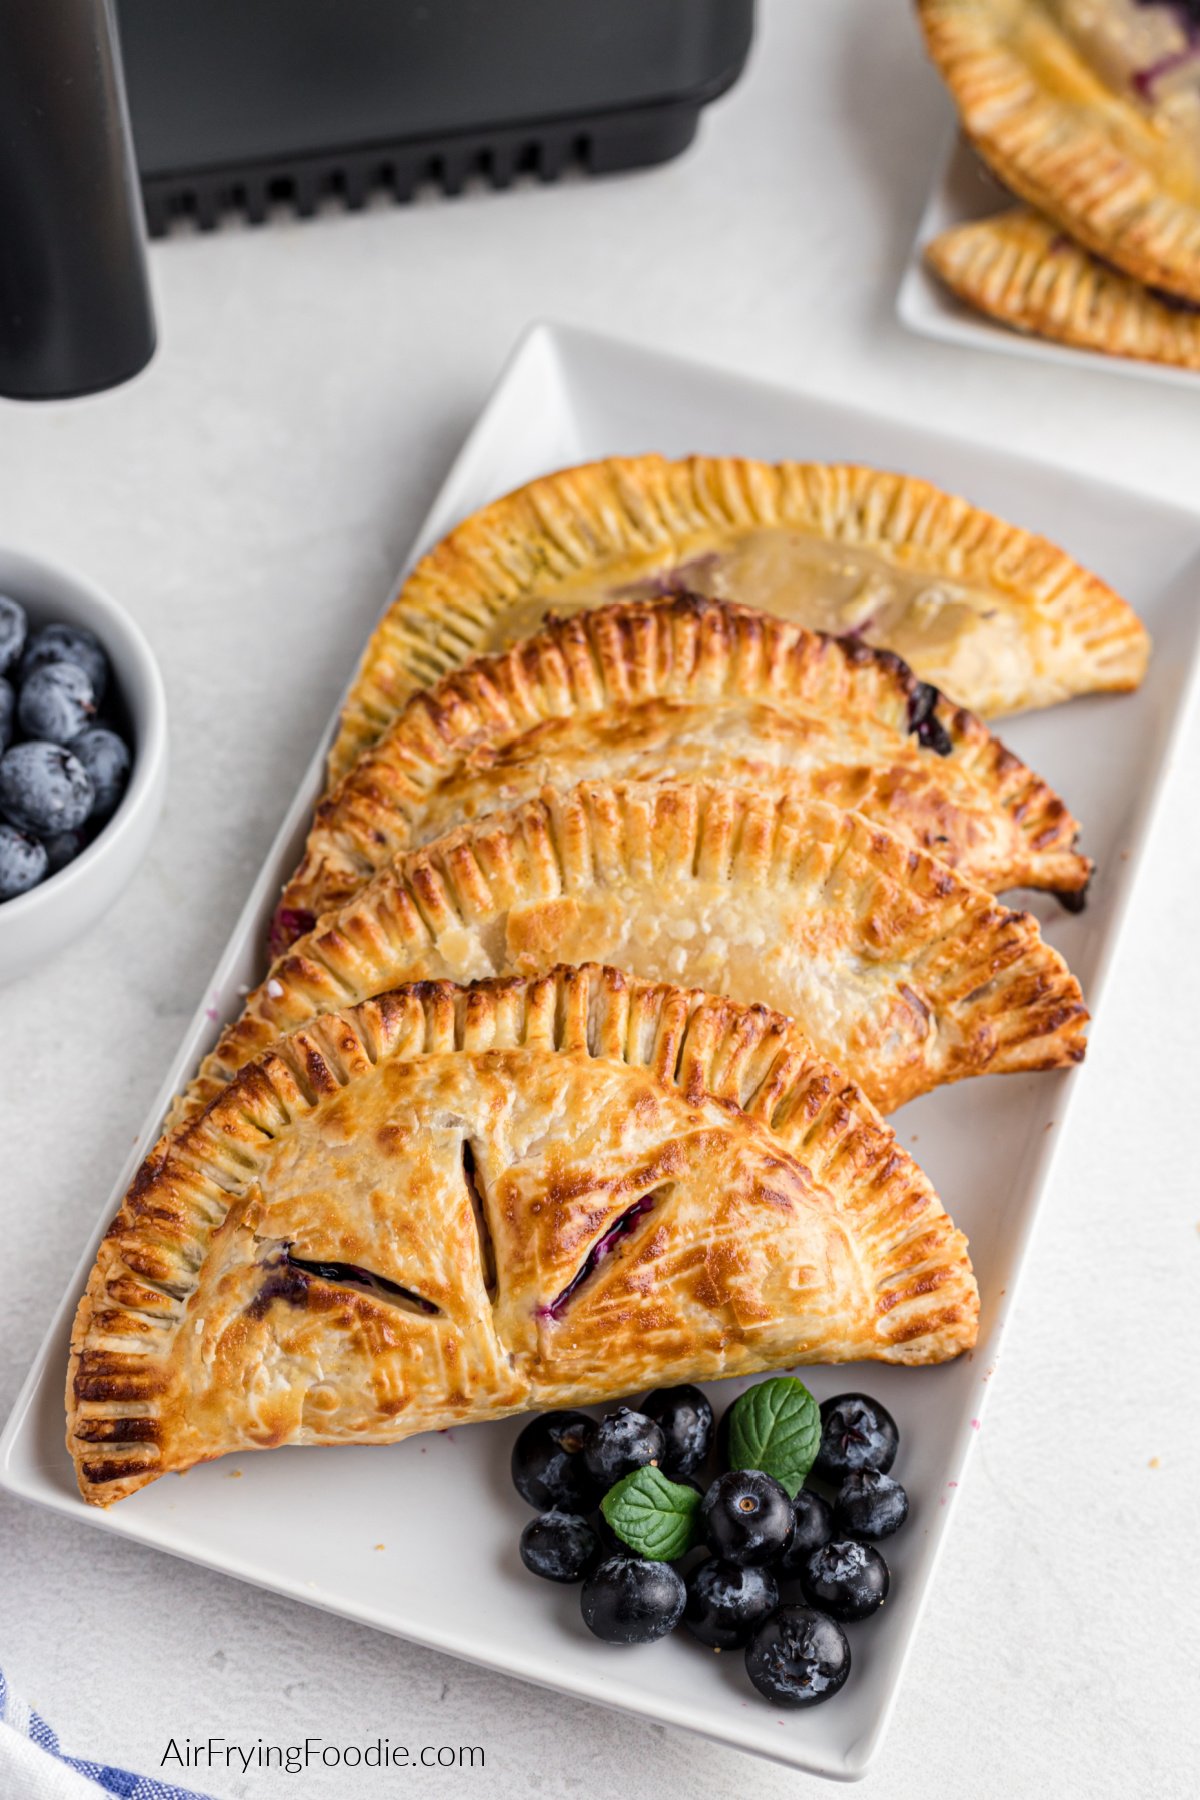 Air fryer blueberry hand pies on a plate with a side of blueberries, ready to eat.